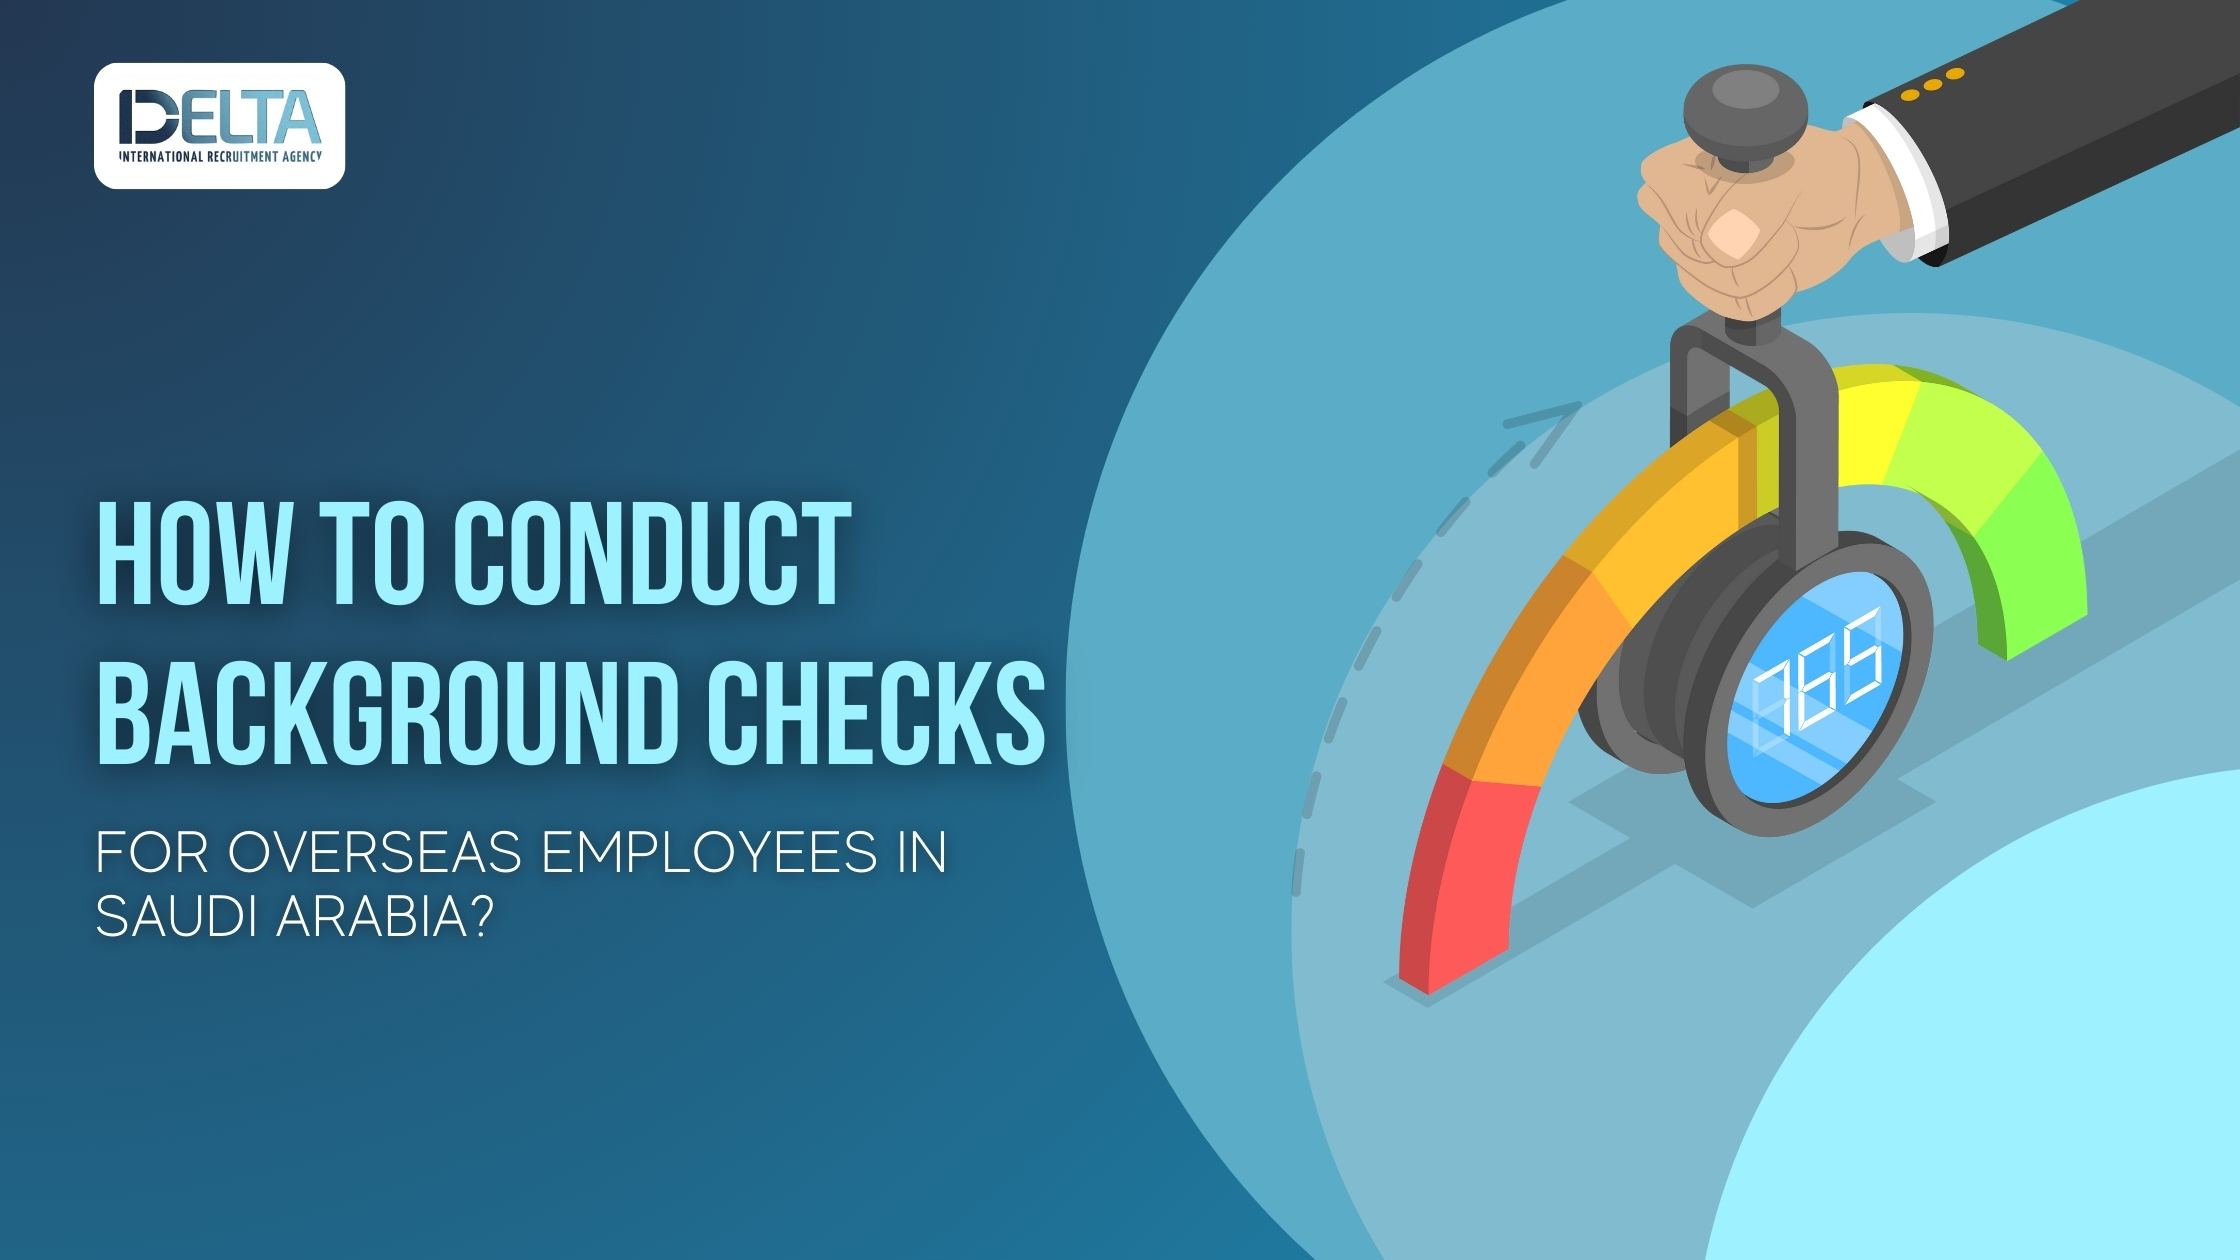 How to Conduct Background Checks for Overseas Employees in Saudi Arabia?